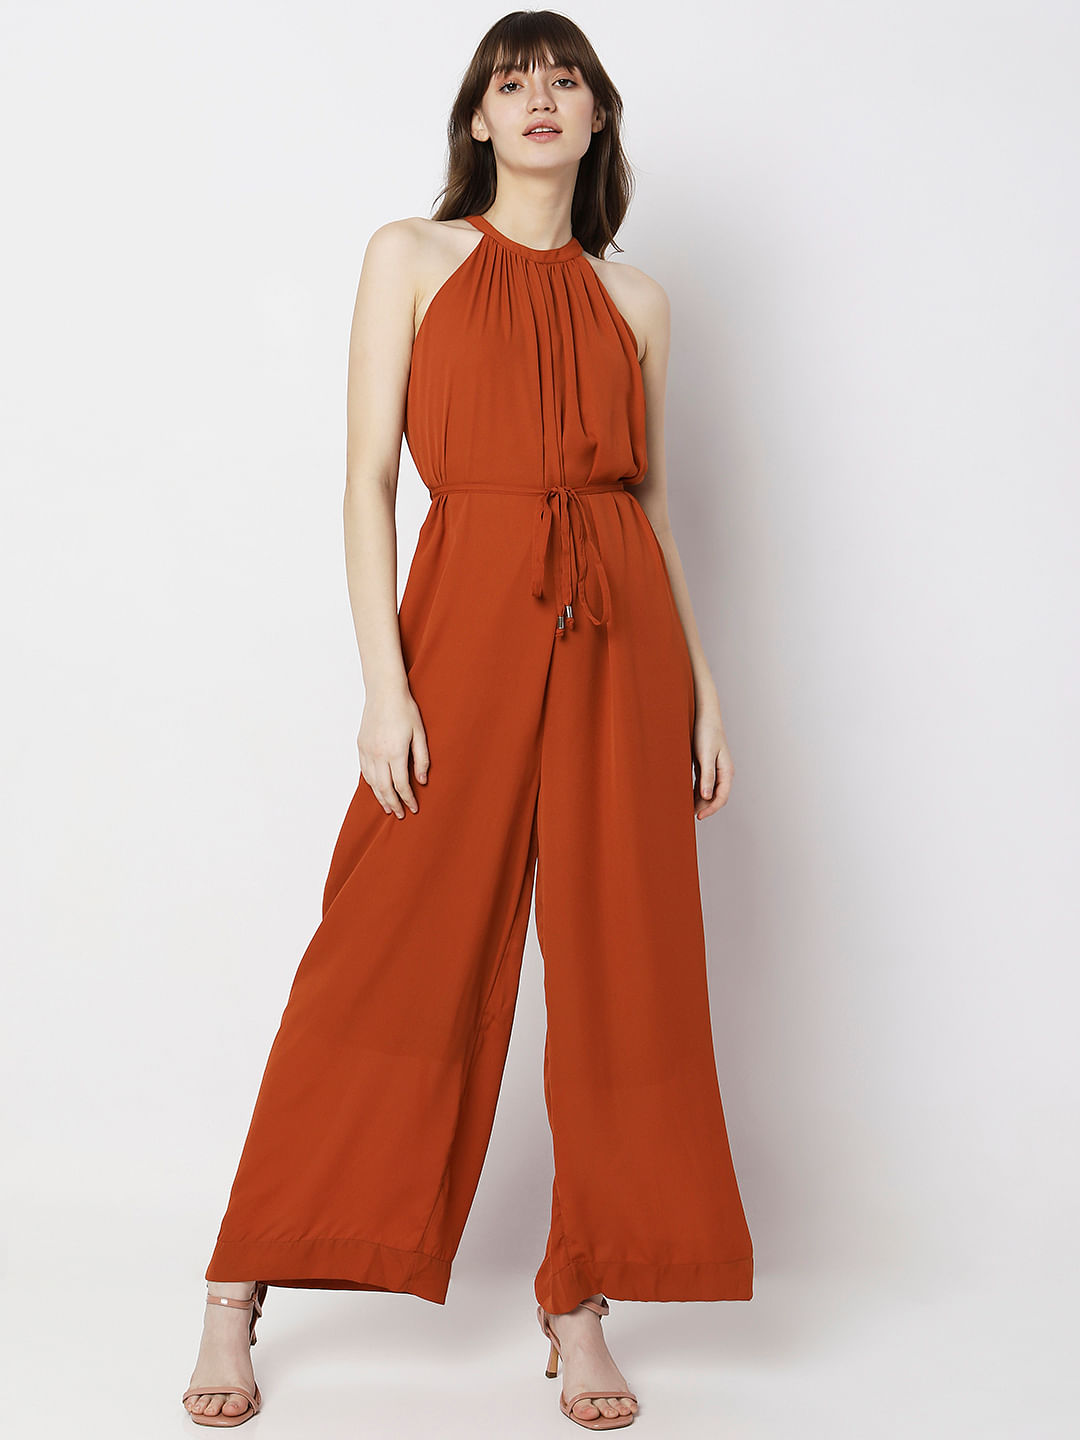 Cristal Stripe Strapless Jumpsuit  FINAL SALE  Greylin Collection   Womens Luxury Fashion Clothing